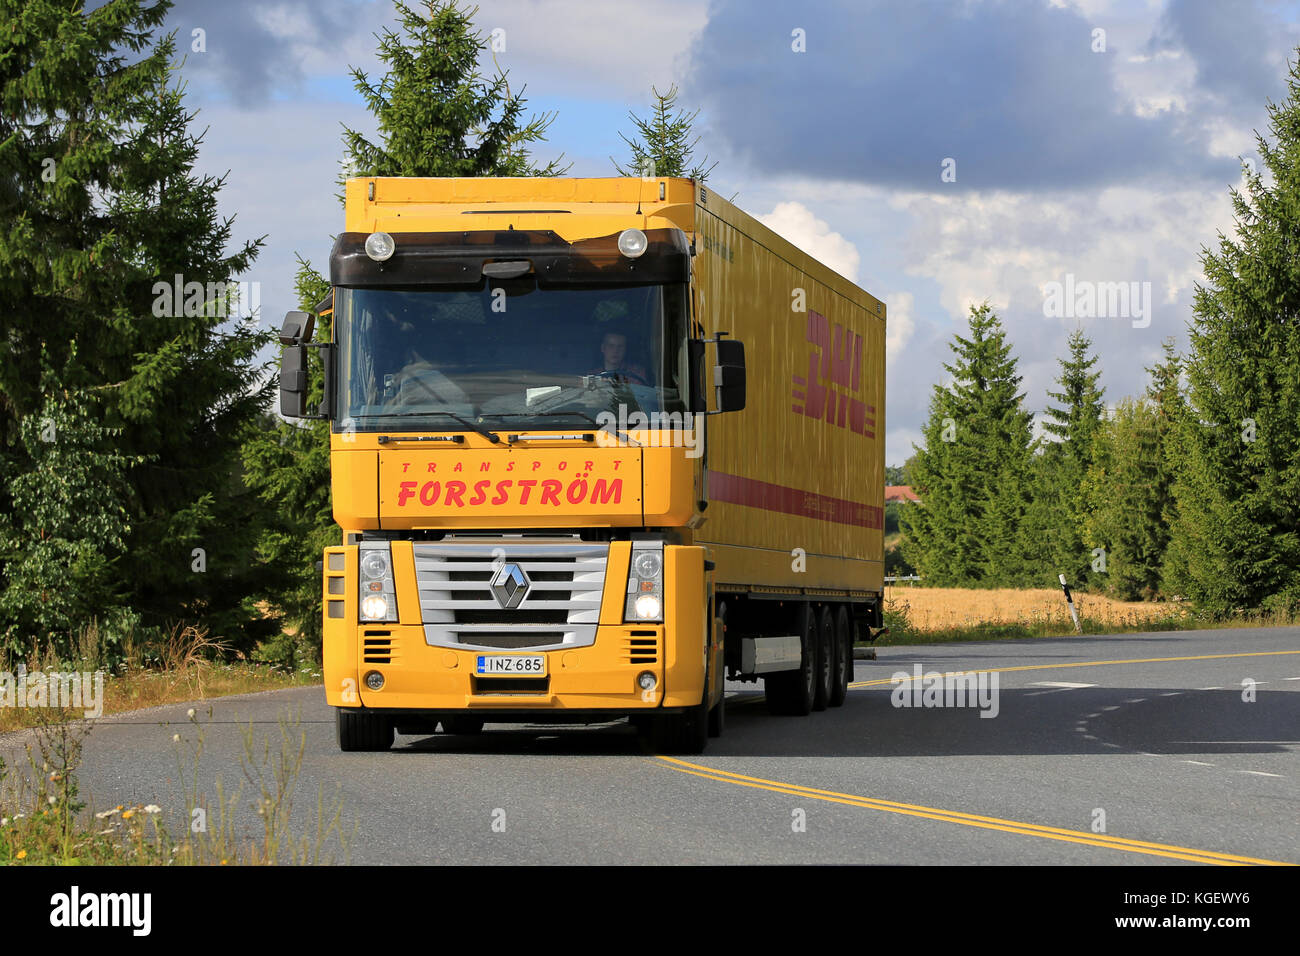 SALO, FINLAND - AUGUST 30, 2015: Yellow Renaut Magnum semi truck on the road. Renault Magnum was manufactured in 1990-2013 and it received the Interna Stock Photo